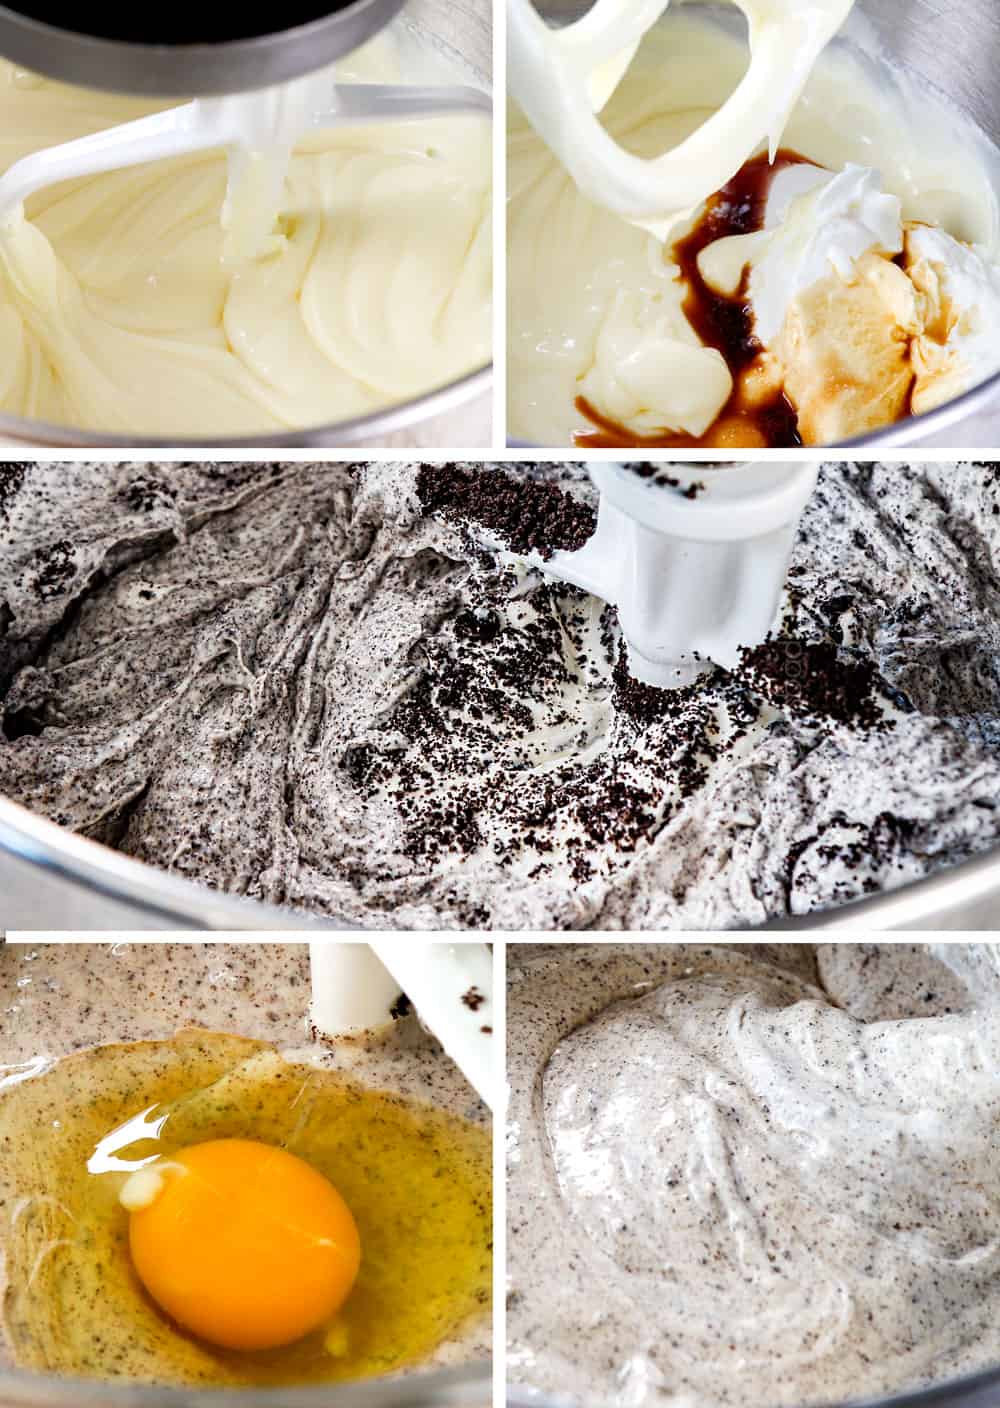 a collage showing how to make Oreo Cheesecake recipe by 1) beating cream cheese and sugar until smooth, 2) beating in sour cream and vanilla, 3) beating in crushed Oreos, 4) beating in eggs, 5) stirring it all together with a spatula